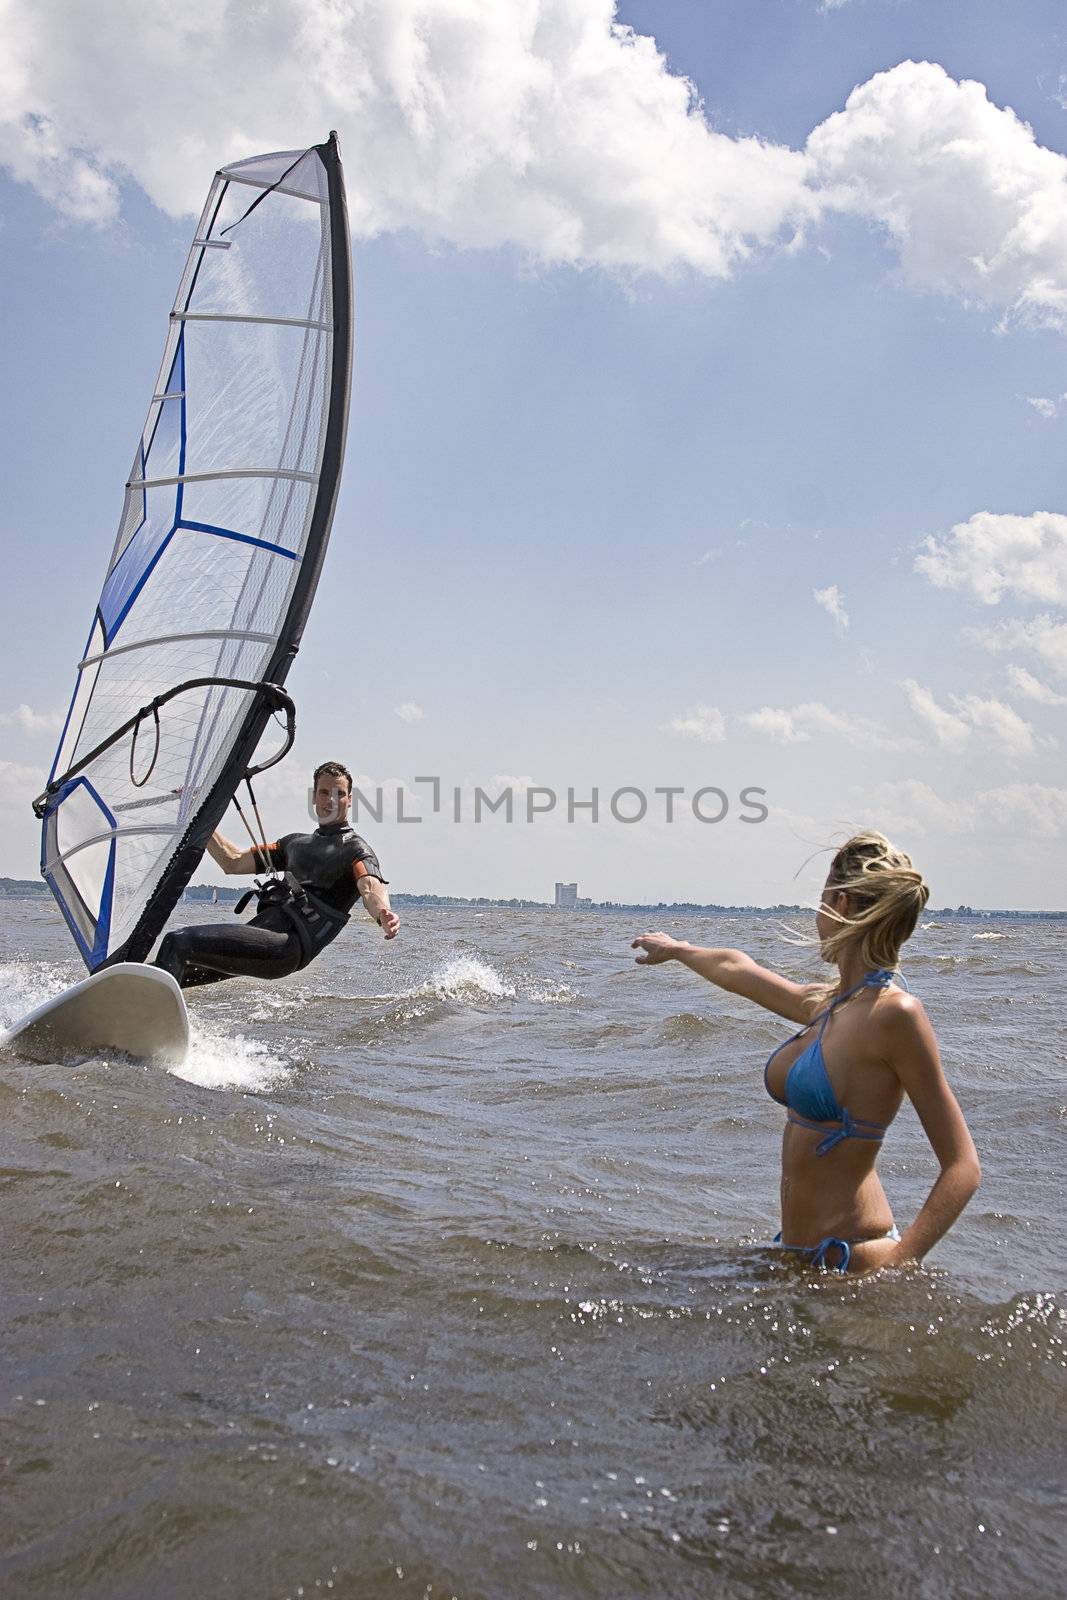 Windsurfer coming in at full speed with hand reaching for girlfriend